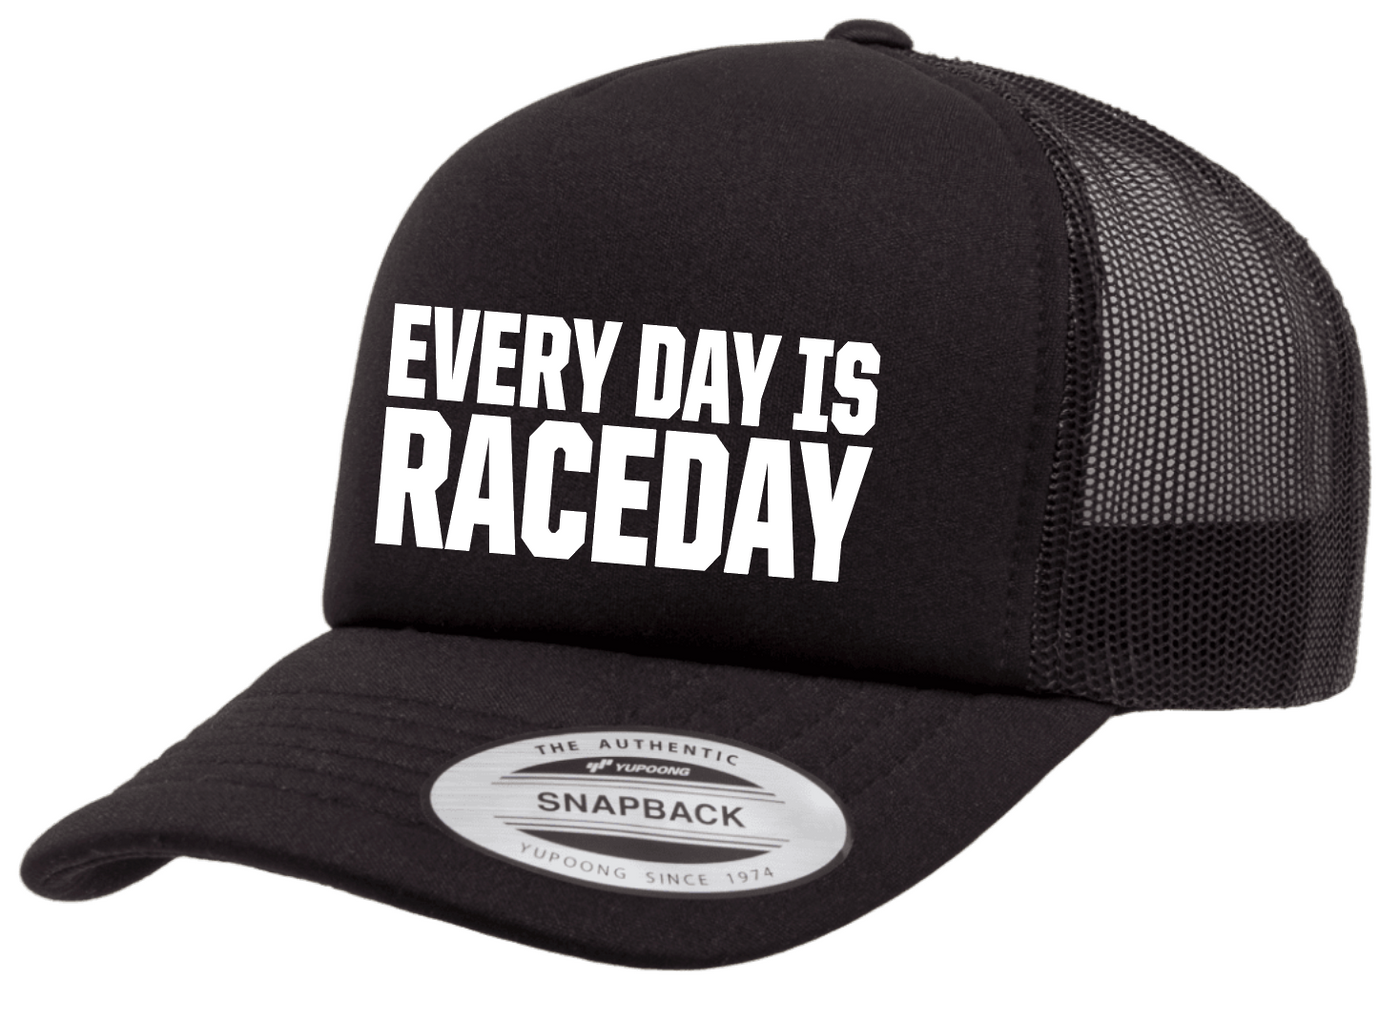 EVERY DAY IS RACEDAY Trucker Curved Bill Adjustable Hat